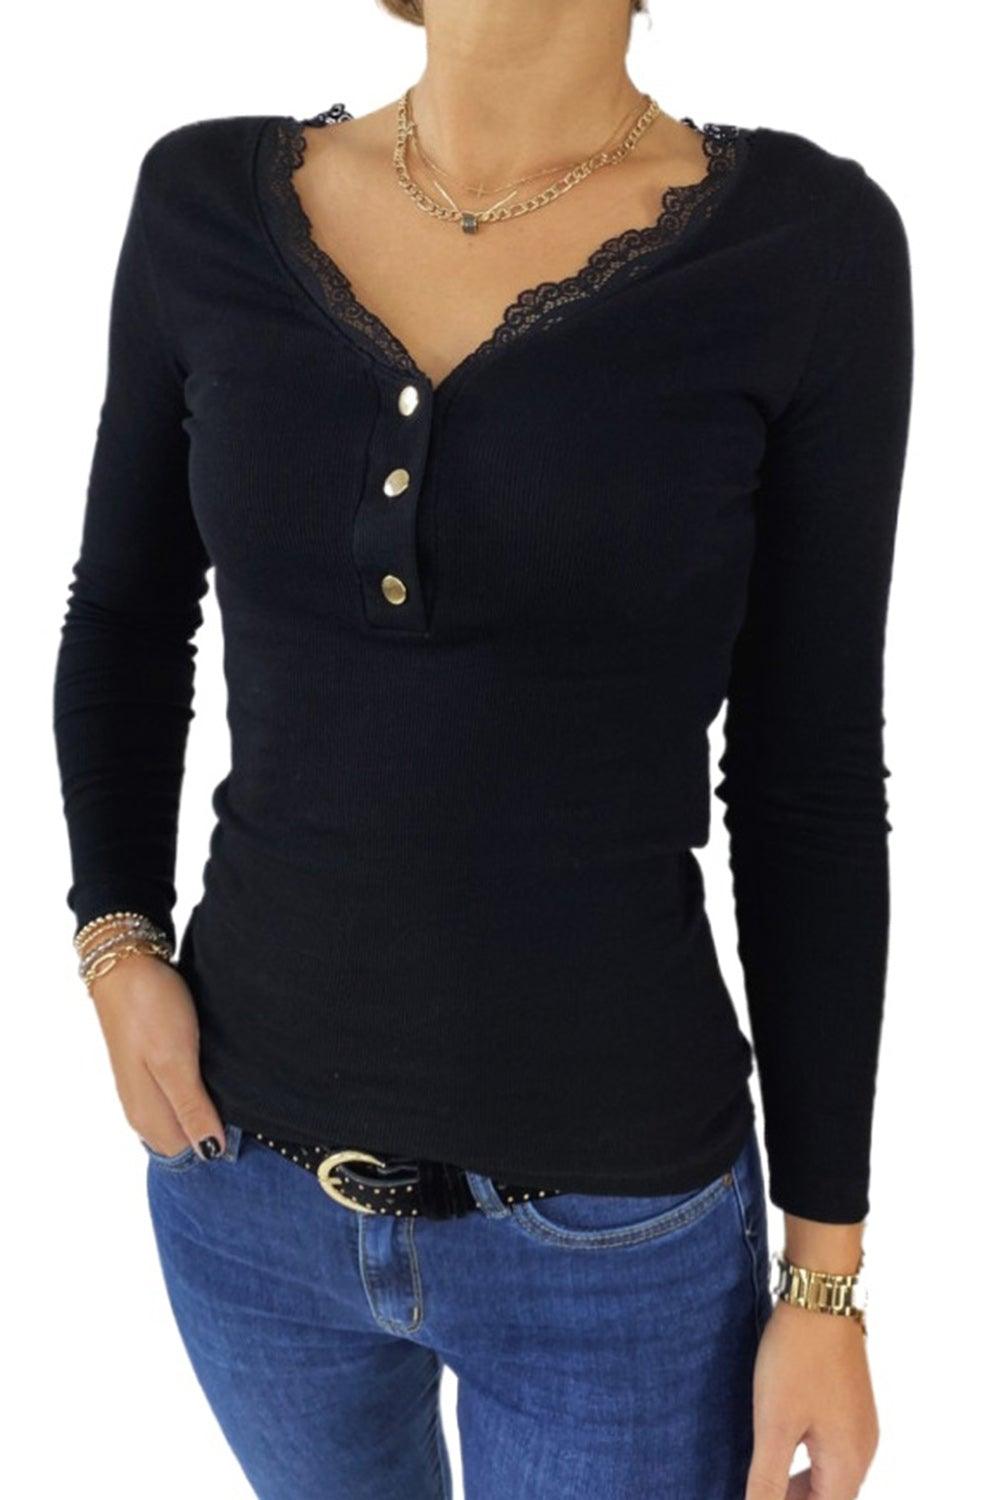 Lace Splicing Buttons V Neck Long Sleeve Top - L & M Kee, LLC